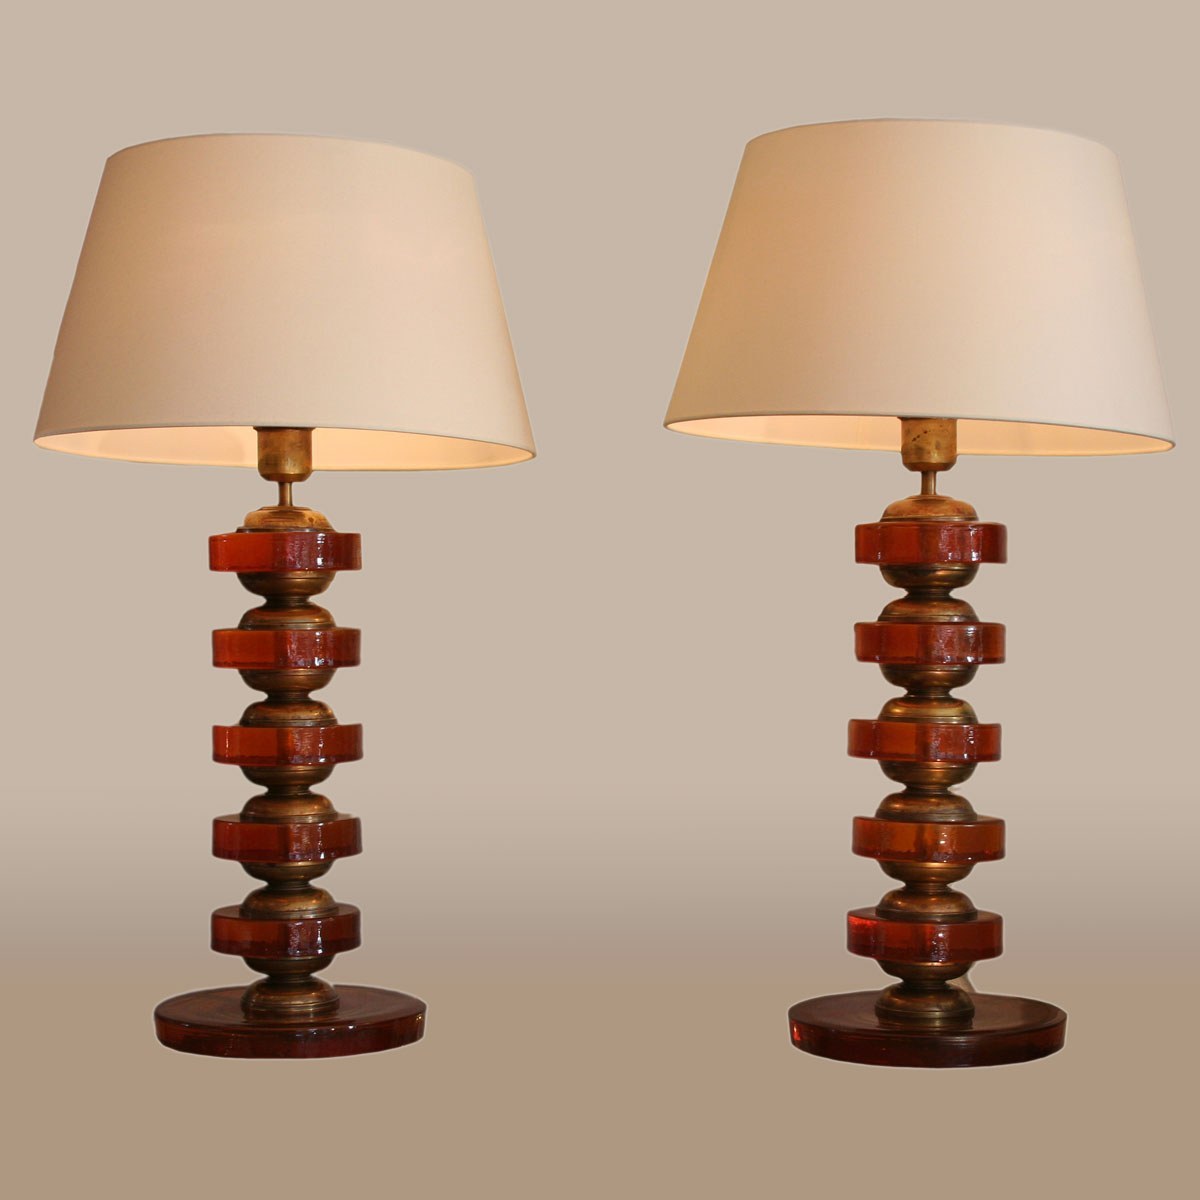 The image for Valerie Wade Lt499 Pair Italian Amber Disc Lamps 01